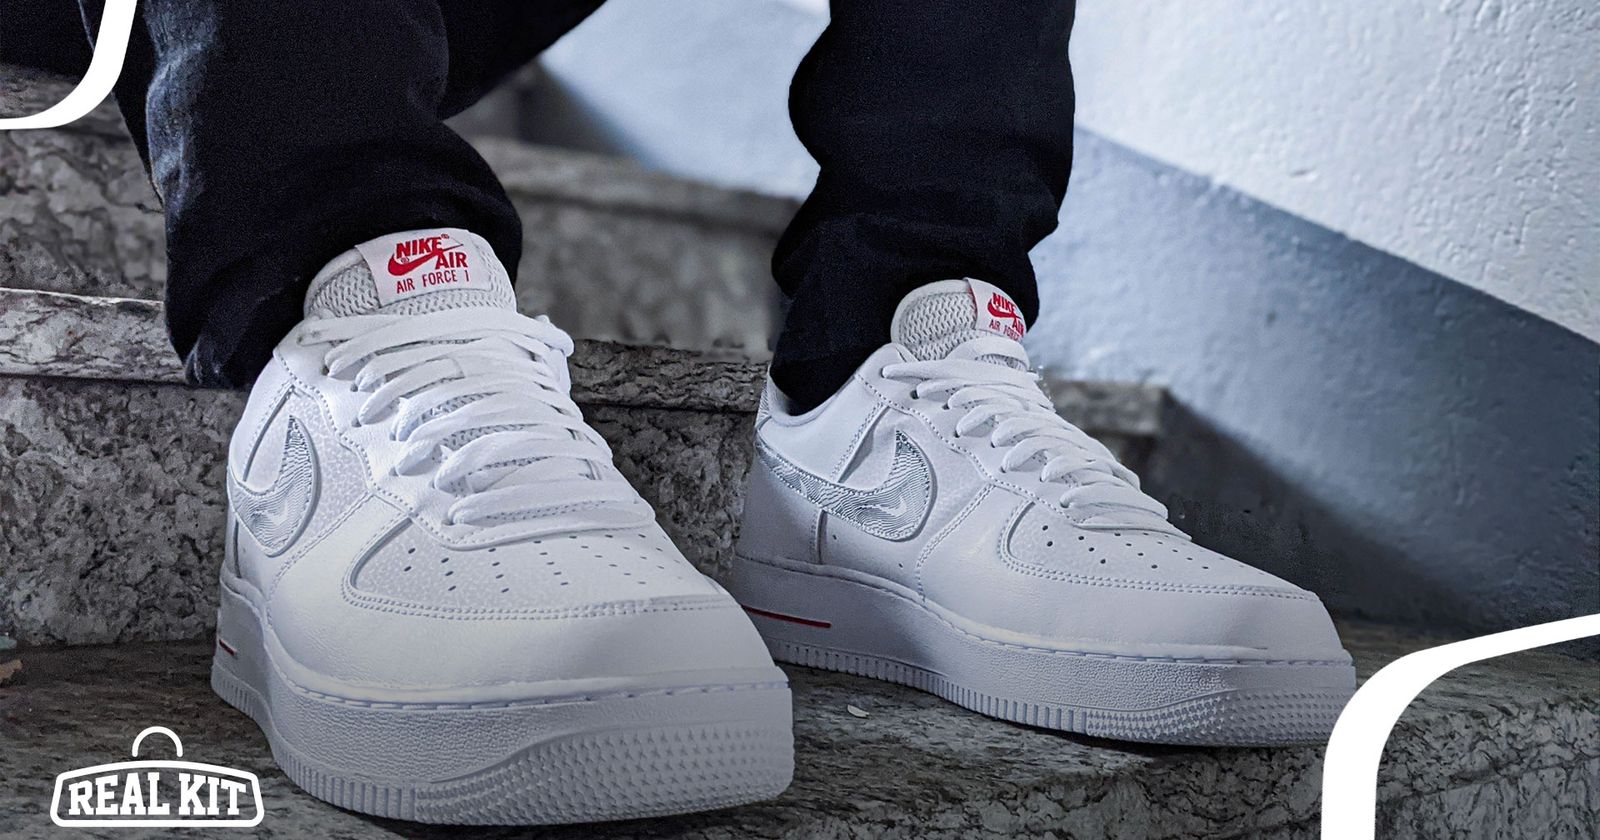 How To Clean Air Force 1s: Step By Step Guide